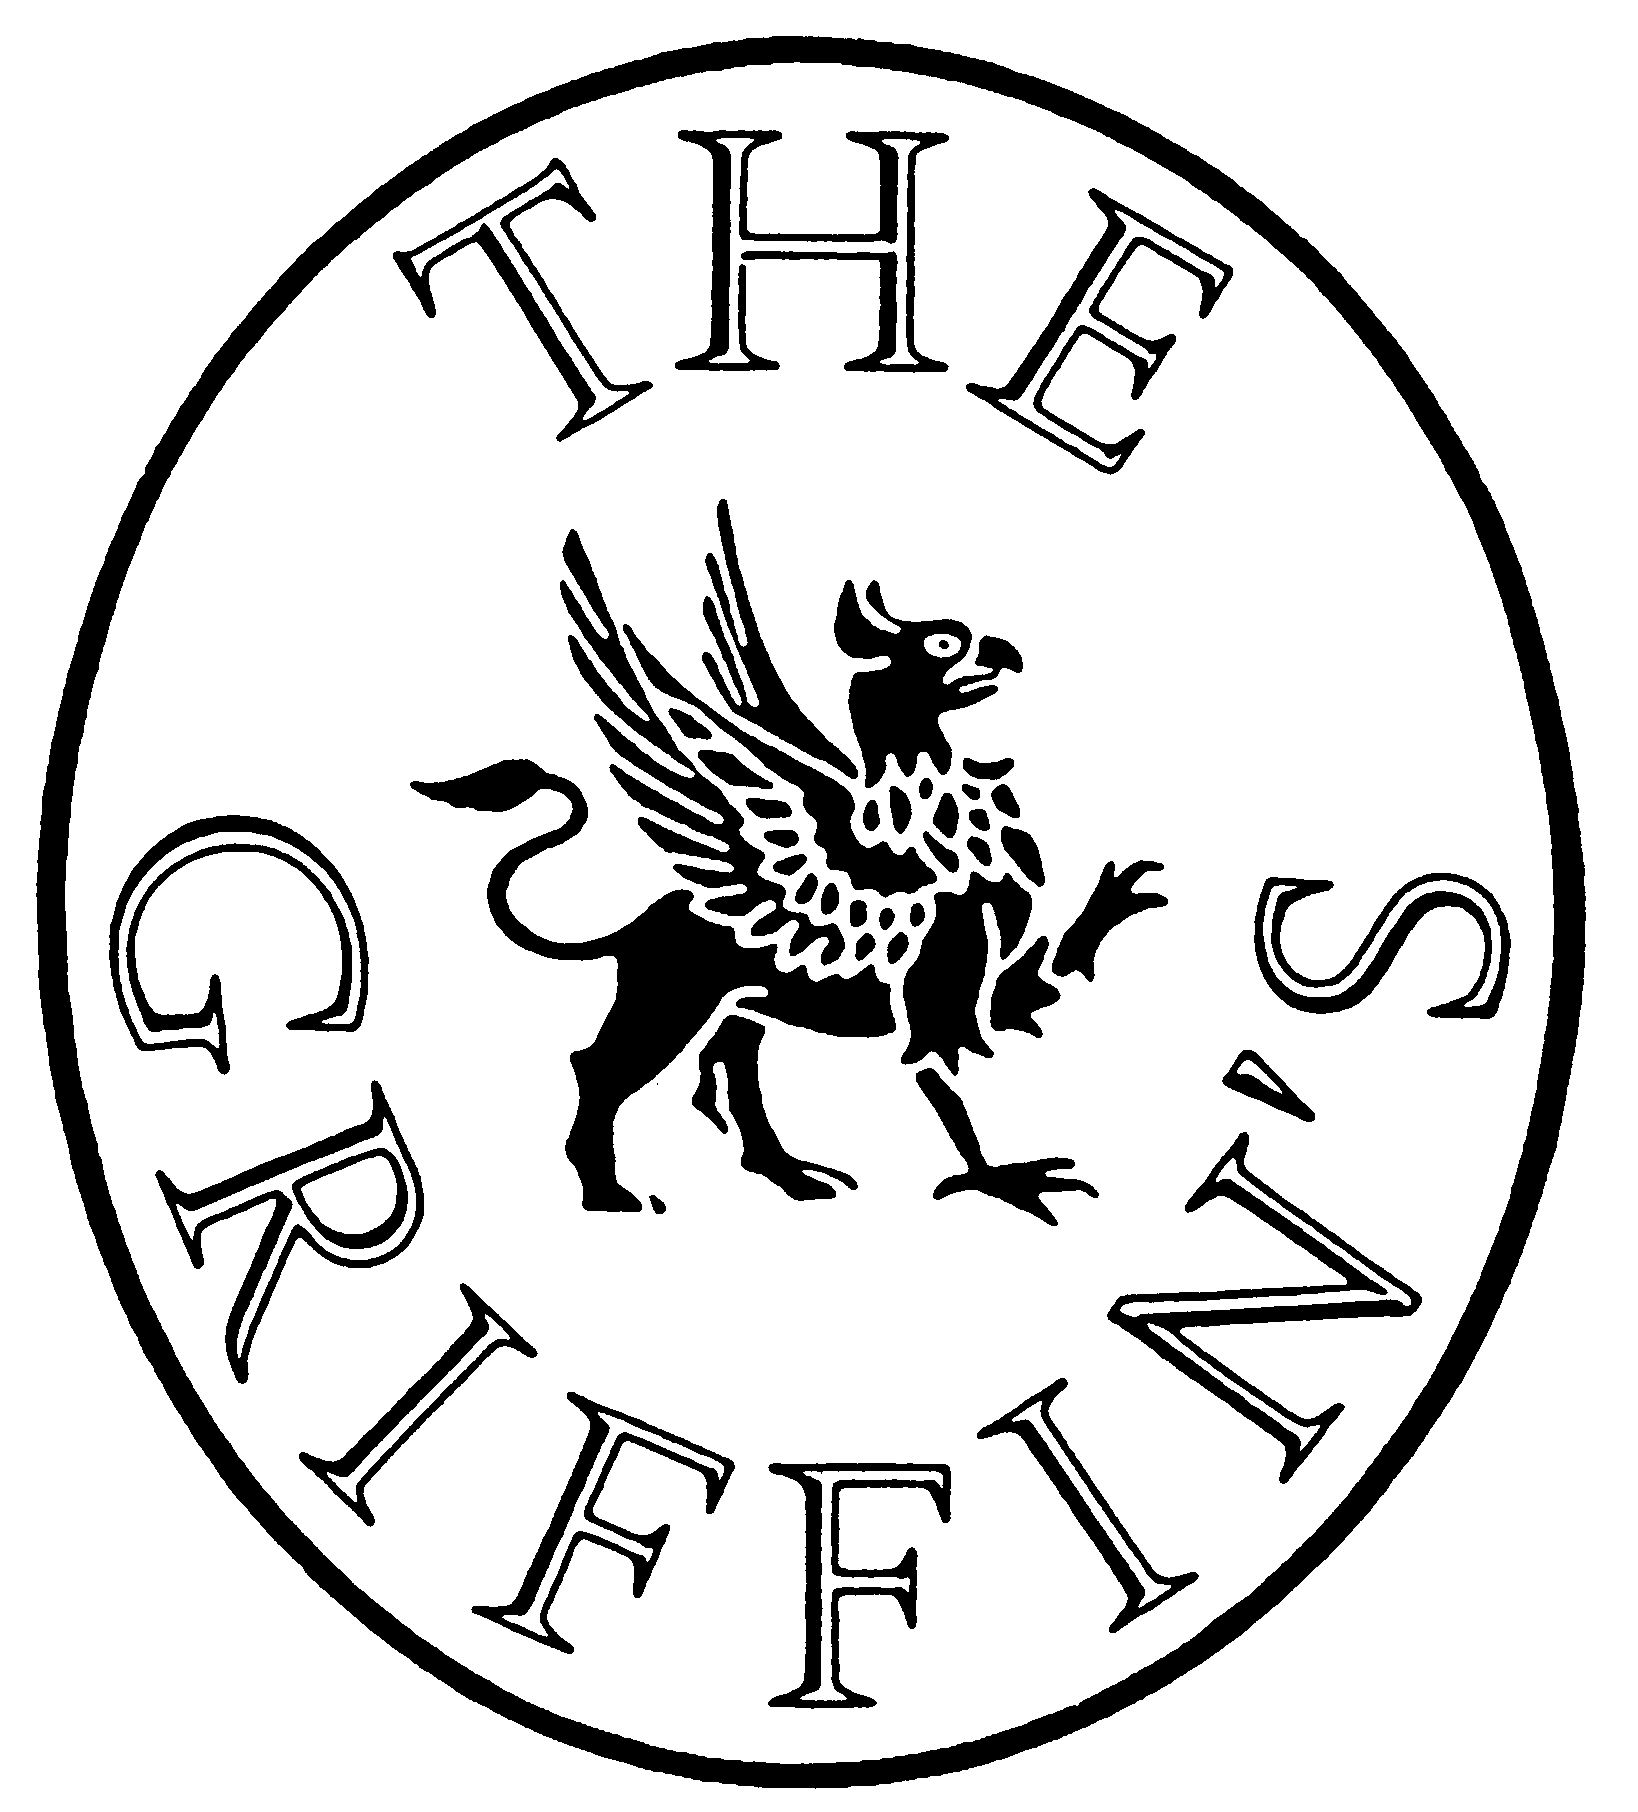 THE GRIFFIN'S